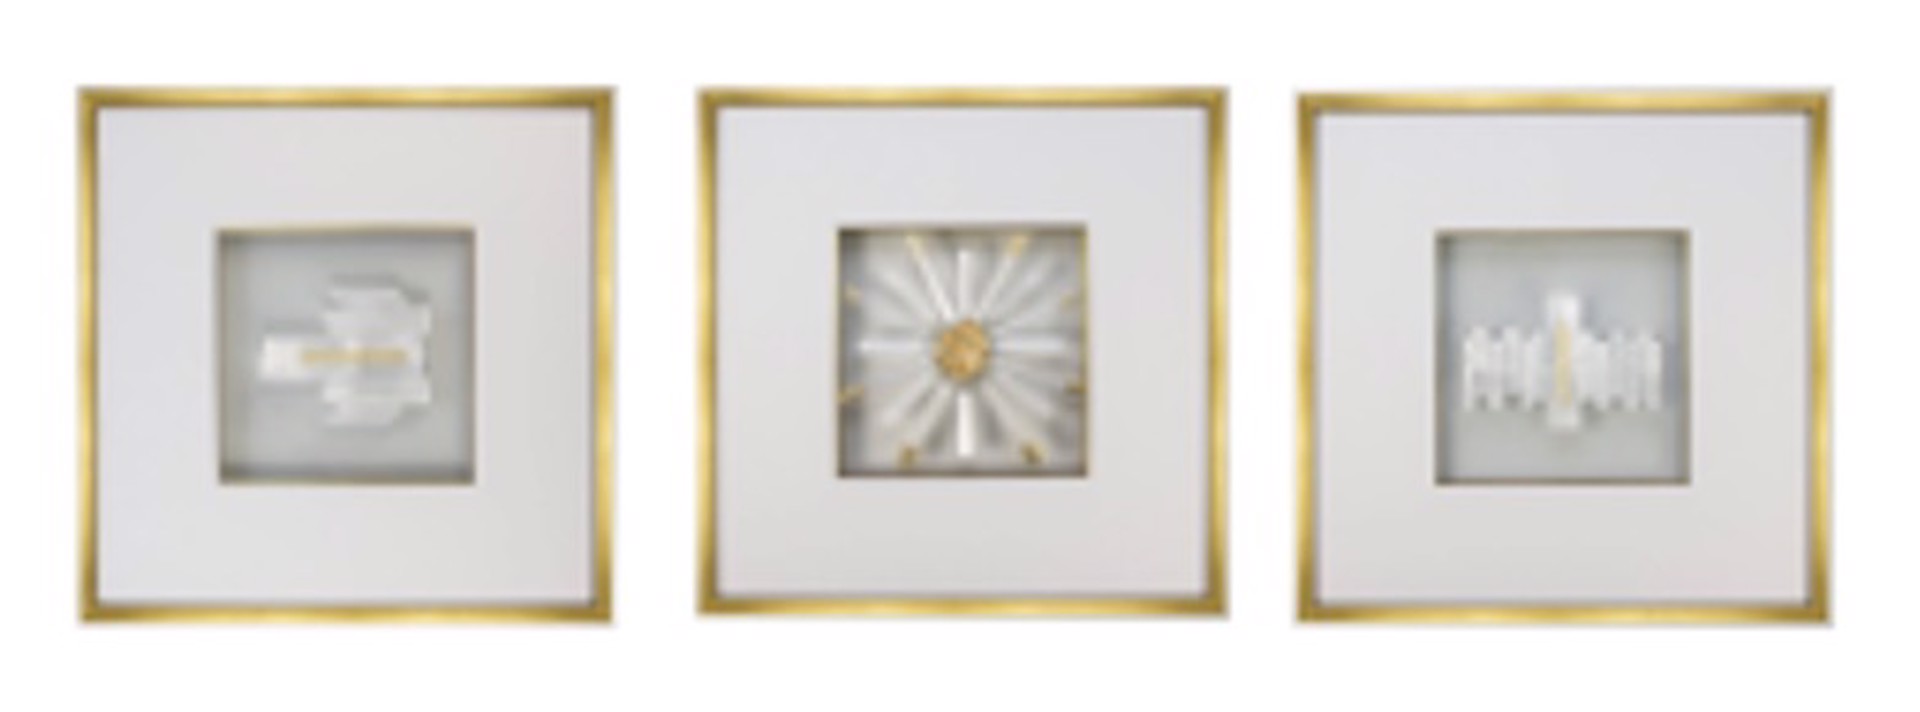 Framed Crystal Selenite by WJC Collection